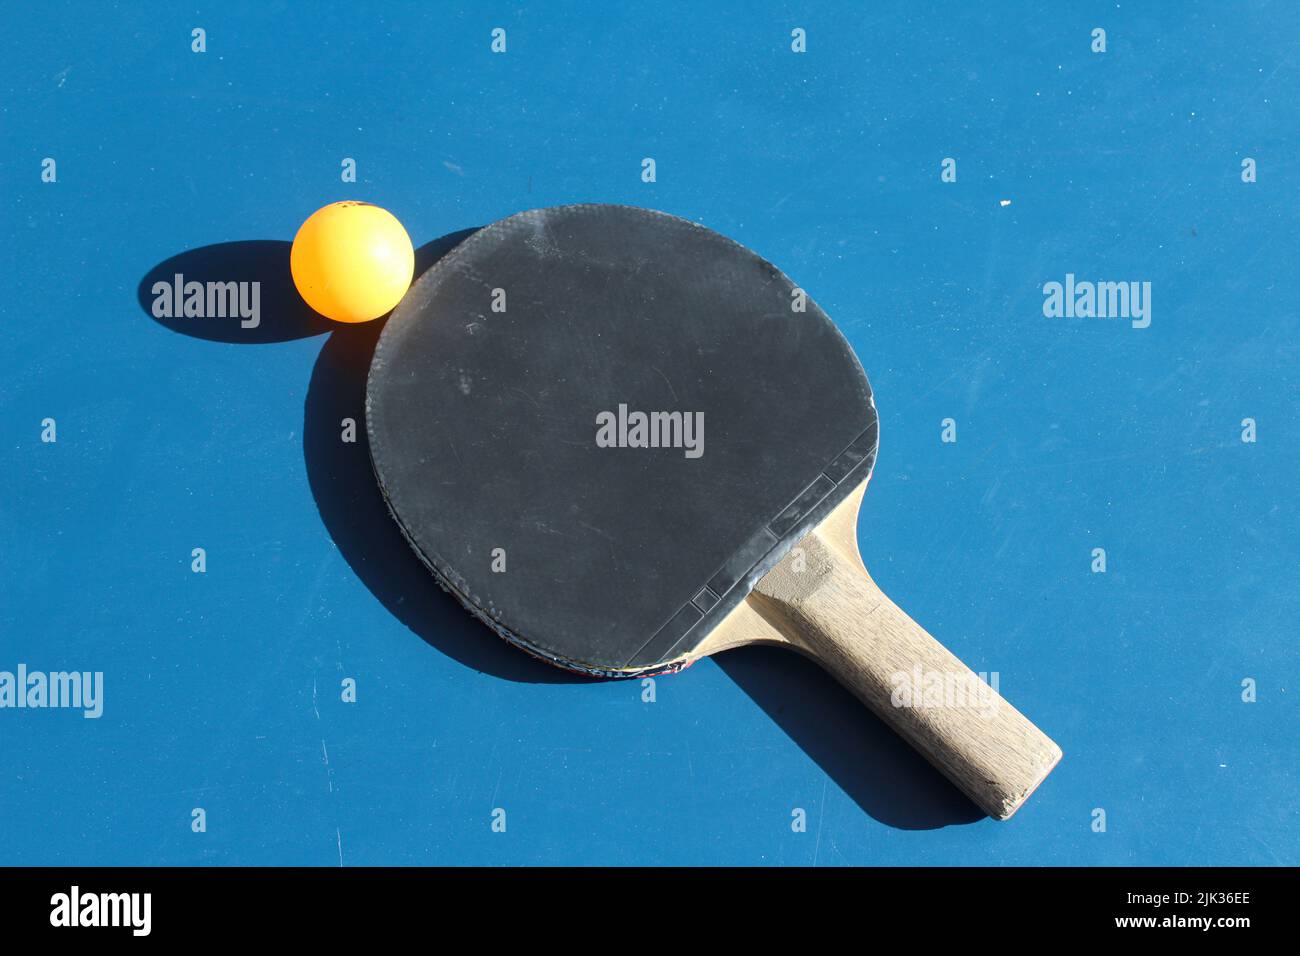 Ping pong or table tennis paddle, ping pong paddle and ball isoleted on blue background. Top view, horizontal photo. Copy space. No people, nobody. Stock Photo